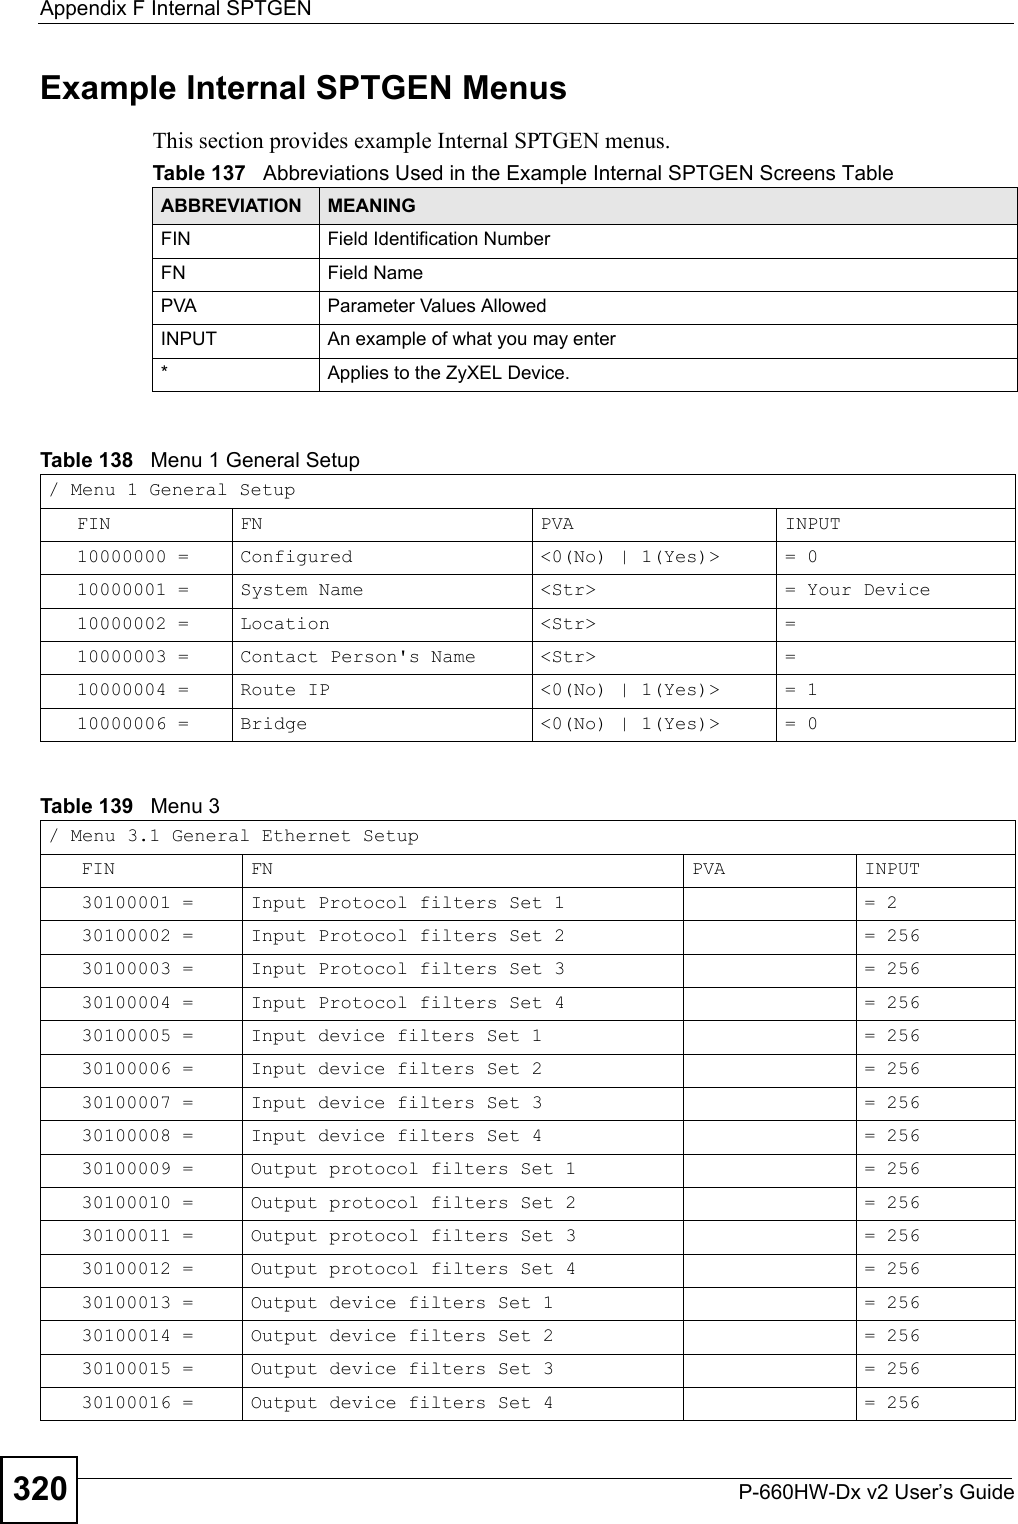 Appendix F Internal SPTGENP-660HW-Dx v2 User’s Guide320Example Internal SPTGEN MenusThis section provides example Internal SPTGEN menus. Table 137   Abbreviations Used in the Example Internal SPTGEN Screens TableABBREVIATION MEANINGFIN Field Identification Number FN Field NamePVA Parameter Values AllowedINPUT An example of what you may enter* Applies to the ZyXEL Device.Table 138   Menu 1 General Setup / Menu 1 General Setup FIN FN PVA INPUT     10000000 =  Configured &lt;0(No) | 1(Yes)&gt;  = 010000001 =  System Name &lt;Str&gt; = Your Device10000002 = Location &lt;Str&gt; =10000003 = Contact Person&apos;s Name &lt;Str&gt; =10000004 = Route IP &lt;0(No) | 1(Yes)&gt;  = 110000006 = Bridge &lt;0(No) | 1(Yes)&gt;  = 0Table 139   Menu 3/ Menu 3.1 General Ethernet Setup FIN FN PVA INPUT30100001 = Input Protocol filters Set 1       = 230100002 = Input Protocol filters Set 2       = 25630100003 = Input Protocol filters Set 3       = 25630100004 = Input Protocol filters Set 4  = 25630100005 = Input device filters Set 1       = 25630100006 = Input device filters Set 2  = 25630100007 = Input device filters Set 3  = 25630100008 = Input device filters Set 4  = 25630100009 = Output protocol filters Set 1  = 25630100010 = Output protocol filters Set 2  = 25630100011 = Output protocol filters Set 3  = 25630100012 = Output protocol filters Set 4  = 25630100013 = Output device filters Set 1  = 25630100014 = Output device filters Set 2  = 25630100015 = Output device filters Set 3  = 25630100016 = Output device filters Set 4  = 256